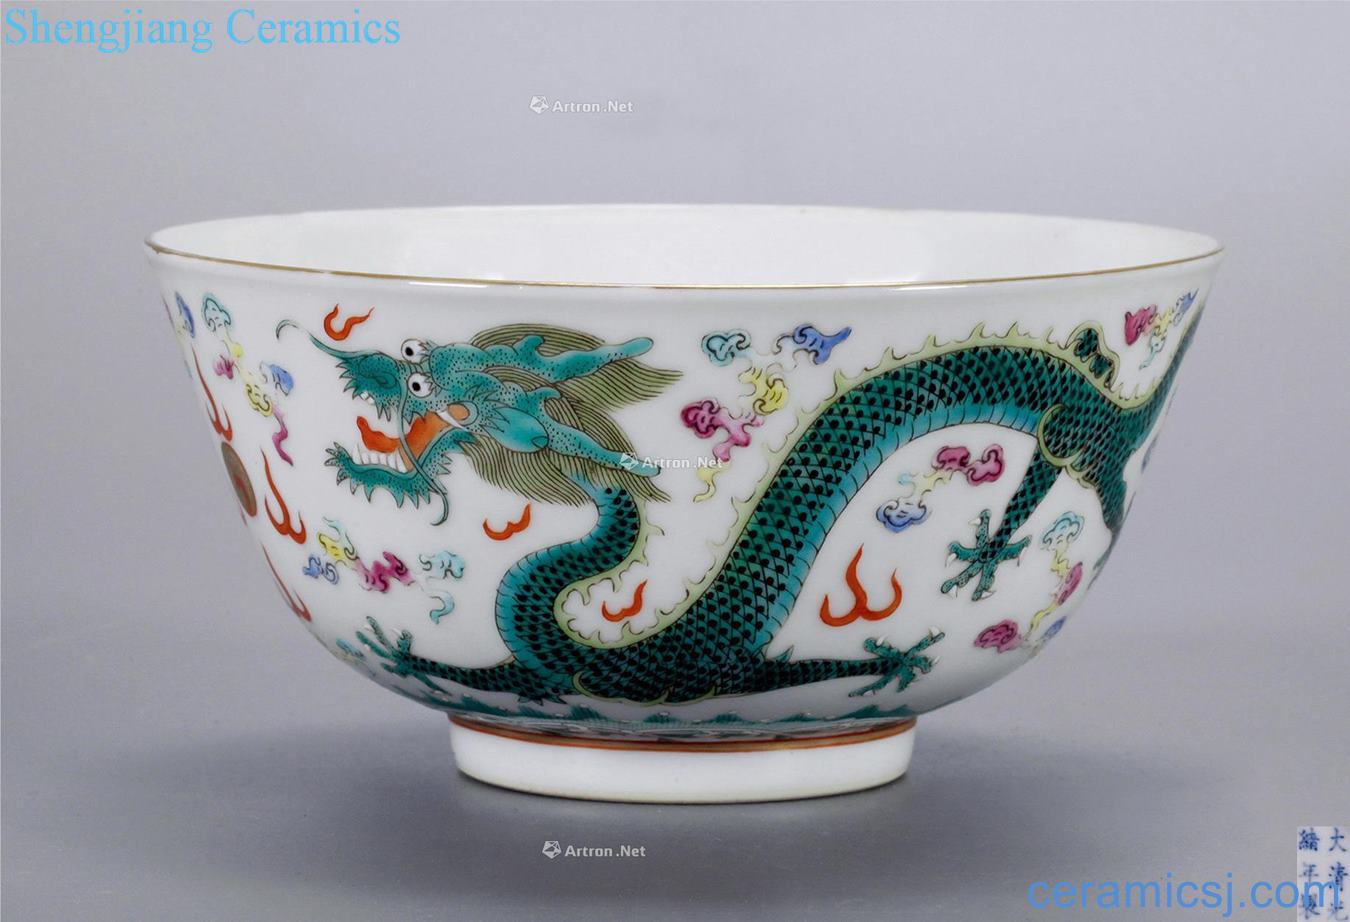 Pastel reign of qing emperor guangxu ssangyong's bowl